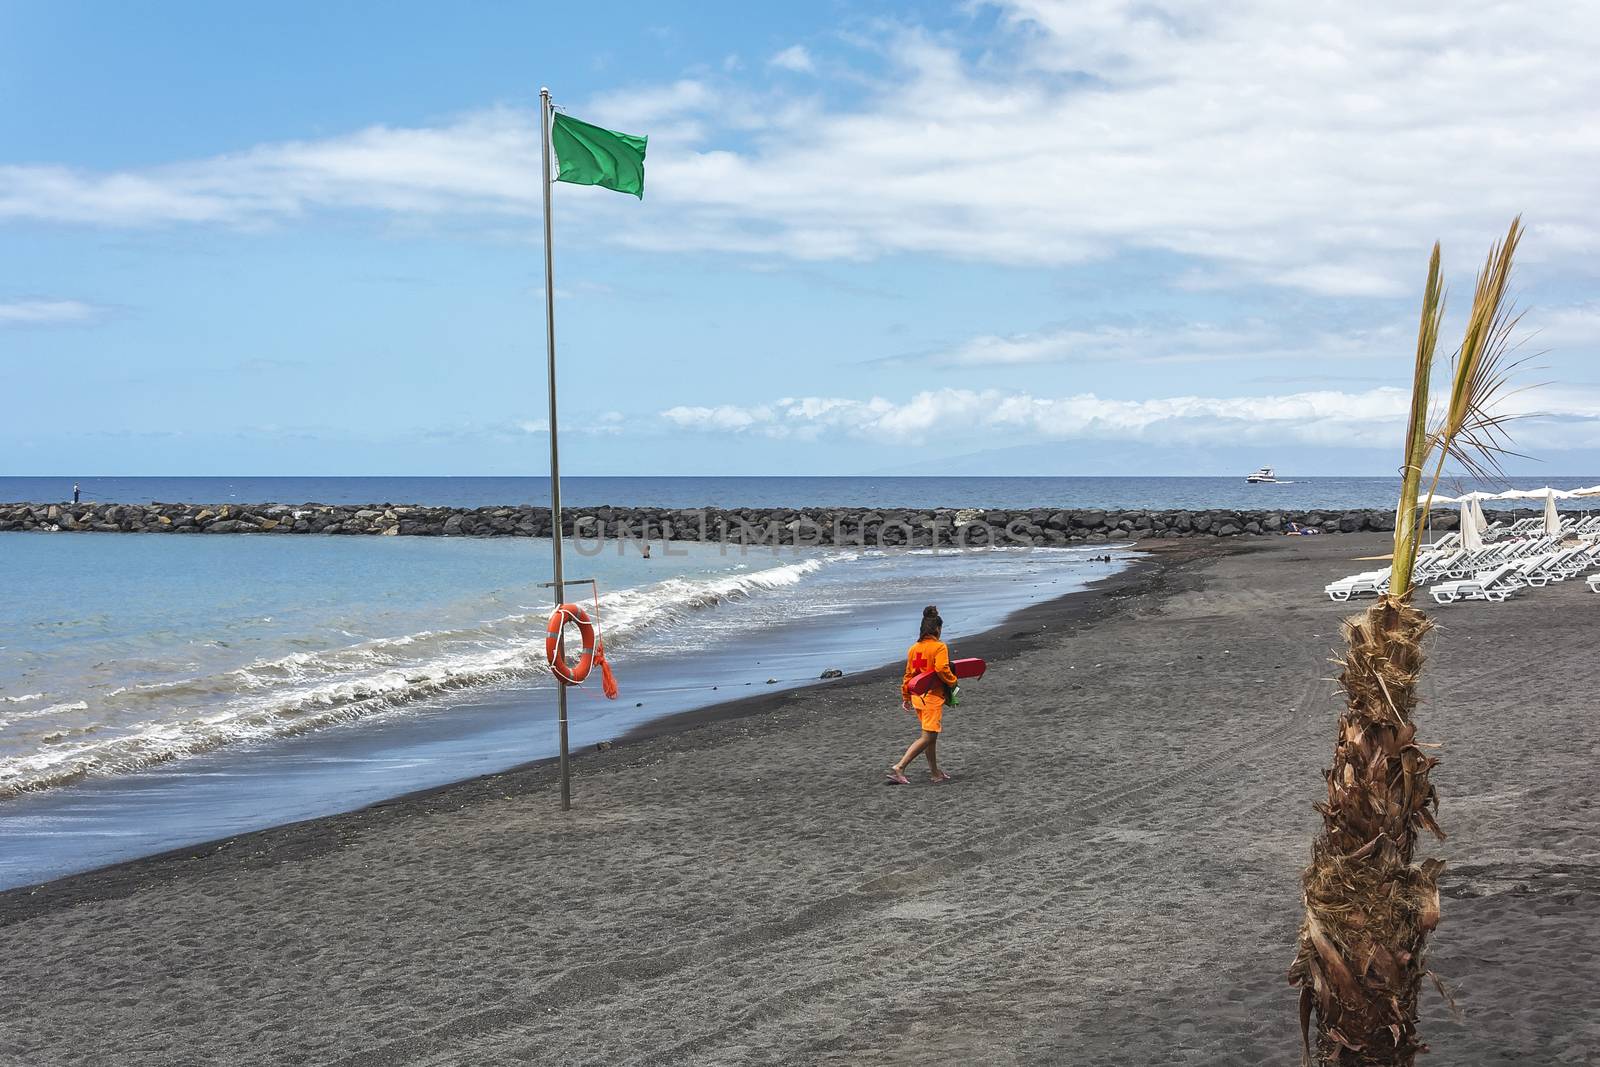 Spain, Tenerife - May 16, 2018: Green flag on the beach. On the shore is a lifeguard.